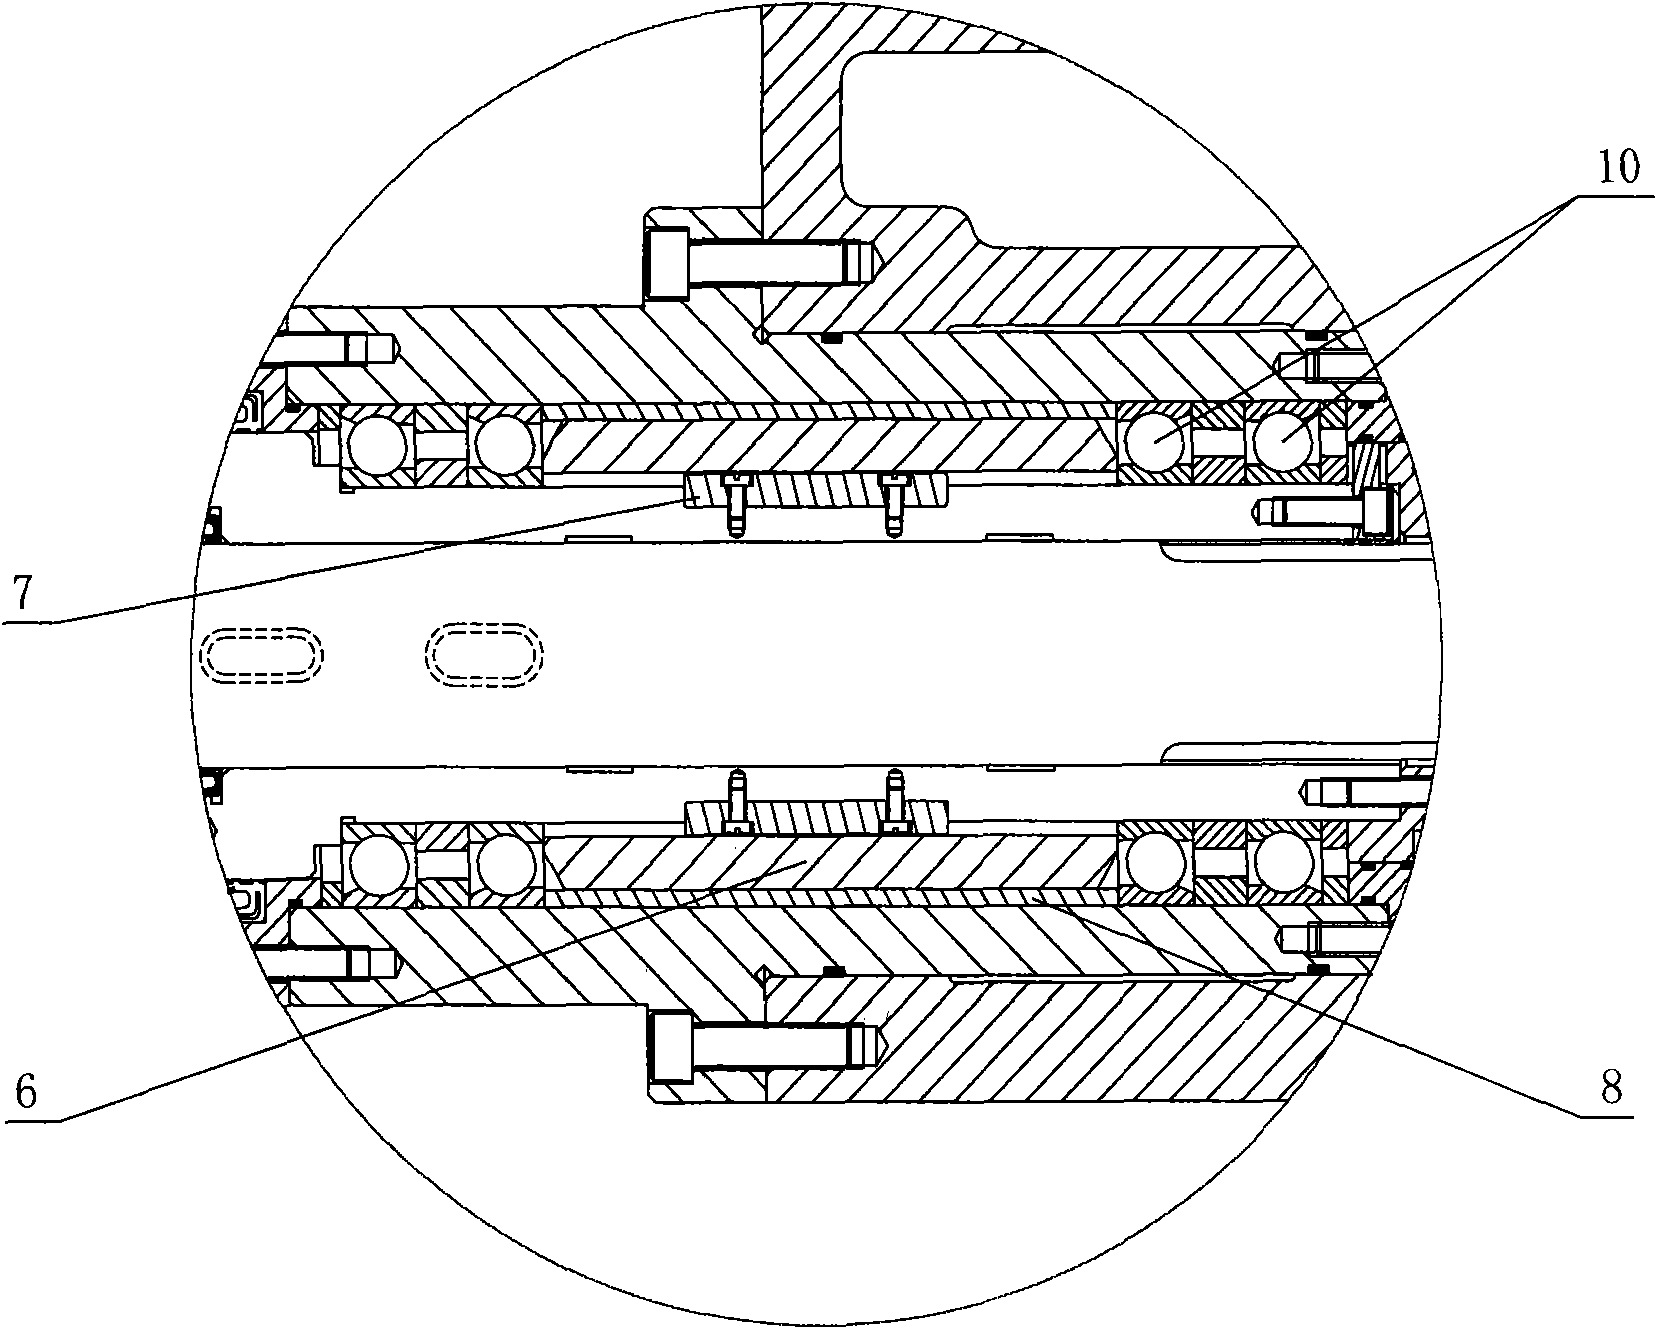 Sleeve barrel structure of horizontal type numerical control boring-milling machine